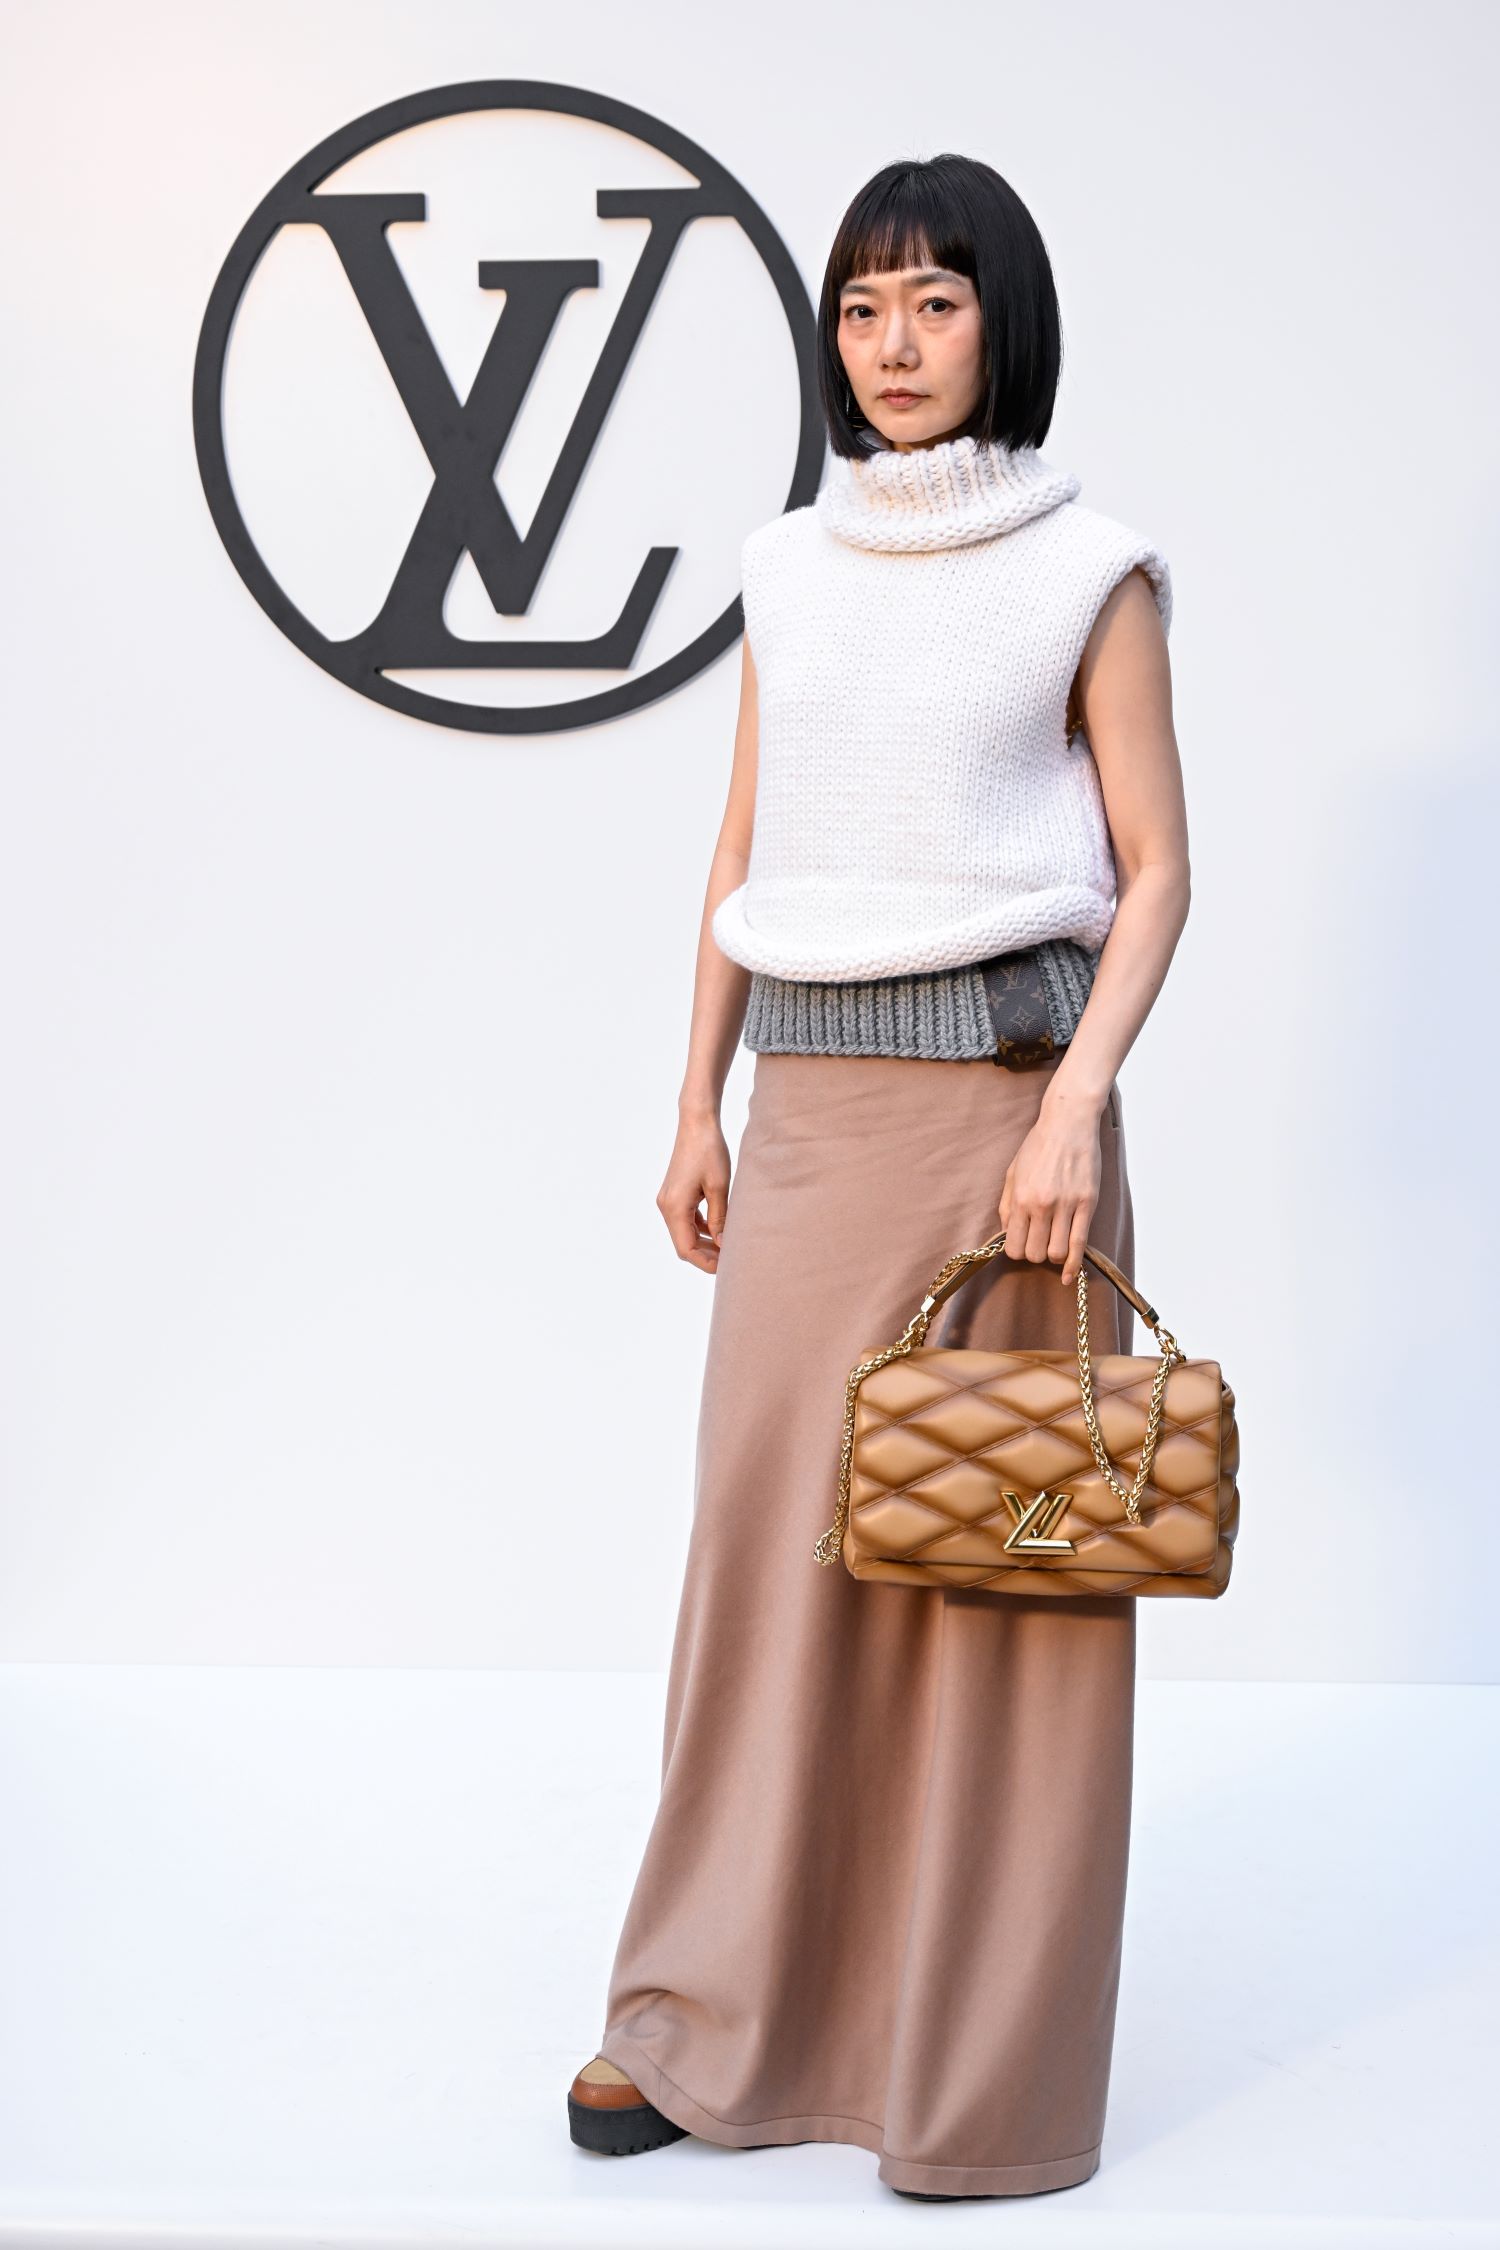 DOONA BAE attending the Cruise 2025 Fashion Show by Louis Vuitton in Barcelona | CRUISE 2025 FASHION SHOW COLLECTION © Louis Vuitton – All rights reserved | Courtesy of Gnazzo Group.